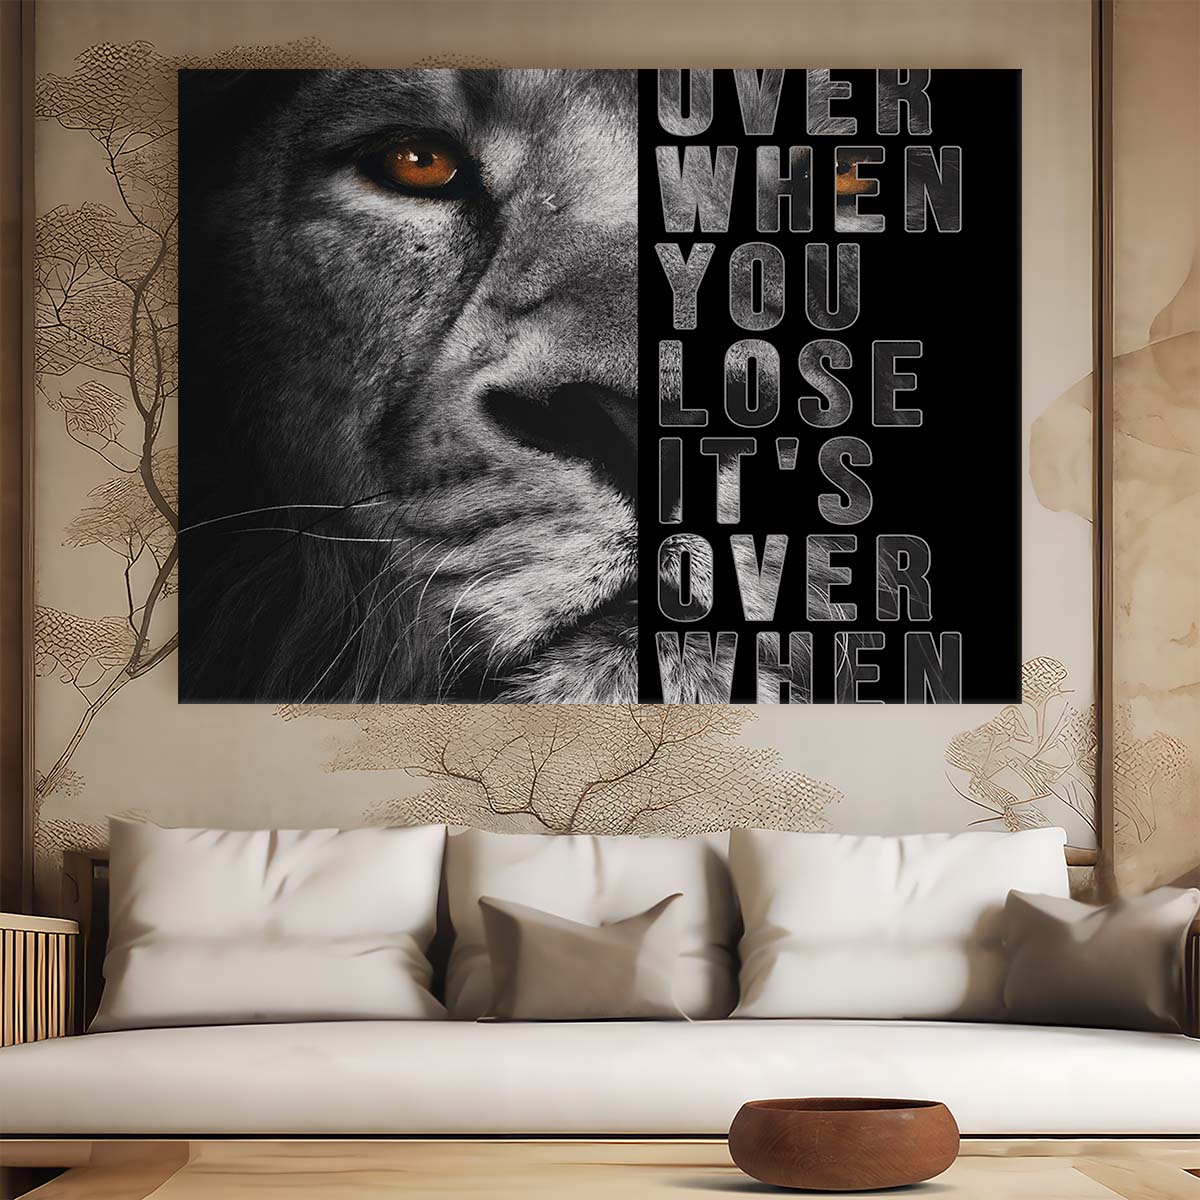 It's Not Over When You Lose Wall Art by Luxuriance Designs. Made in USA.